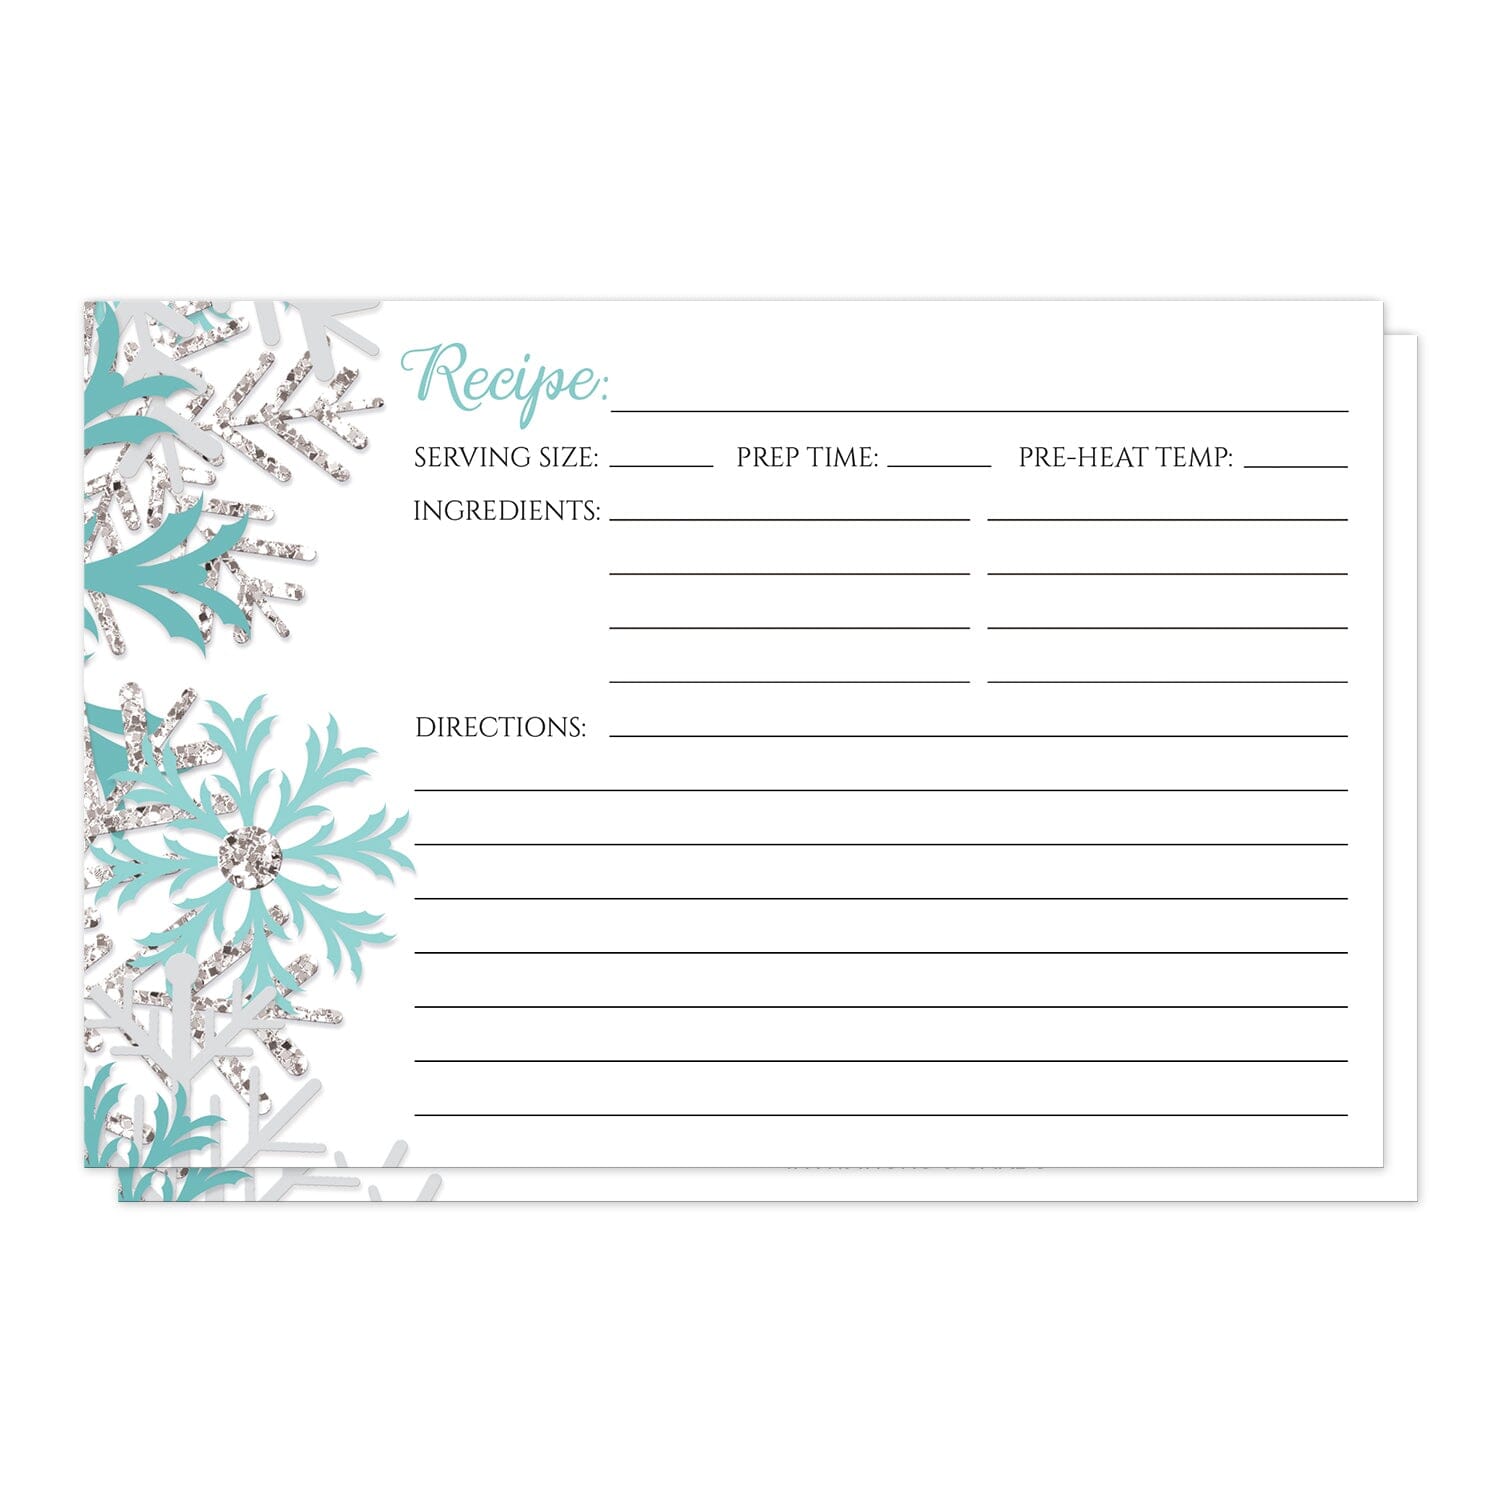 Winter Teal Silver Snowflake Recipe Cards at Artistically Invited. Winter teal silver snowflake recipe cards designed with teal, light teal, and silver-colored glitter-illustrated snowflakes along the left side. The recipe is to be handwritten over white on the remaining area of the recipe cards beside the snowflakes design.